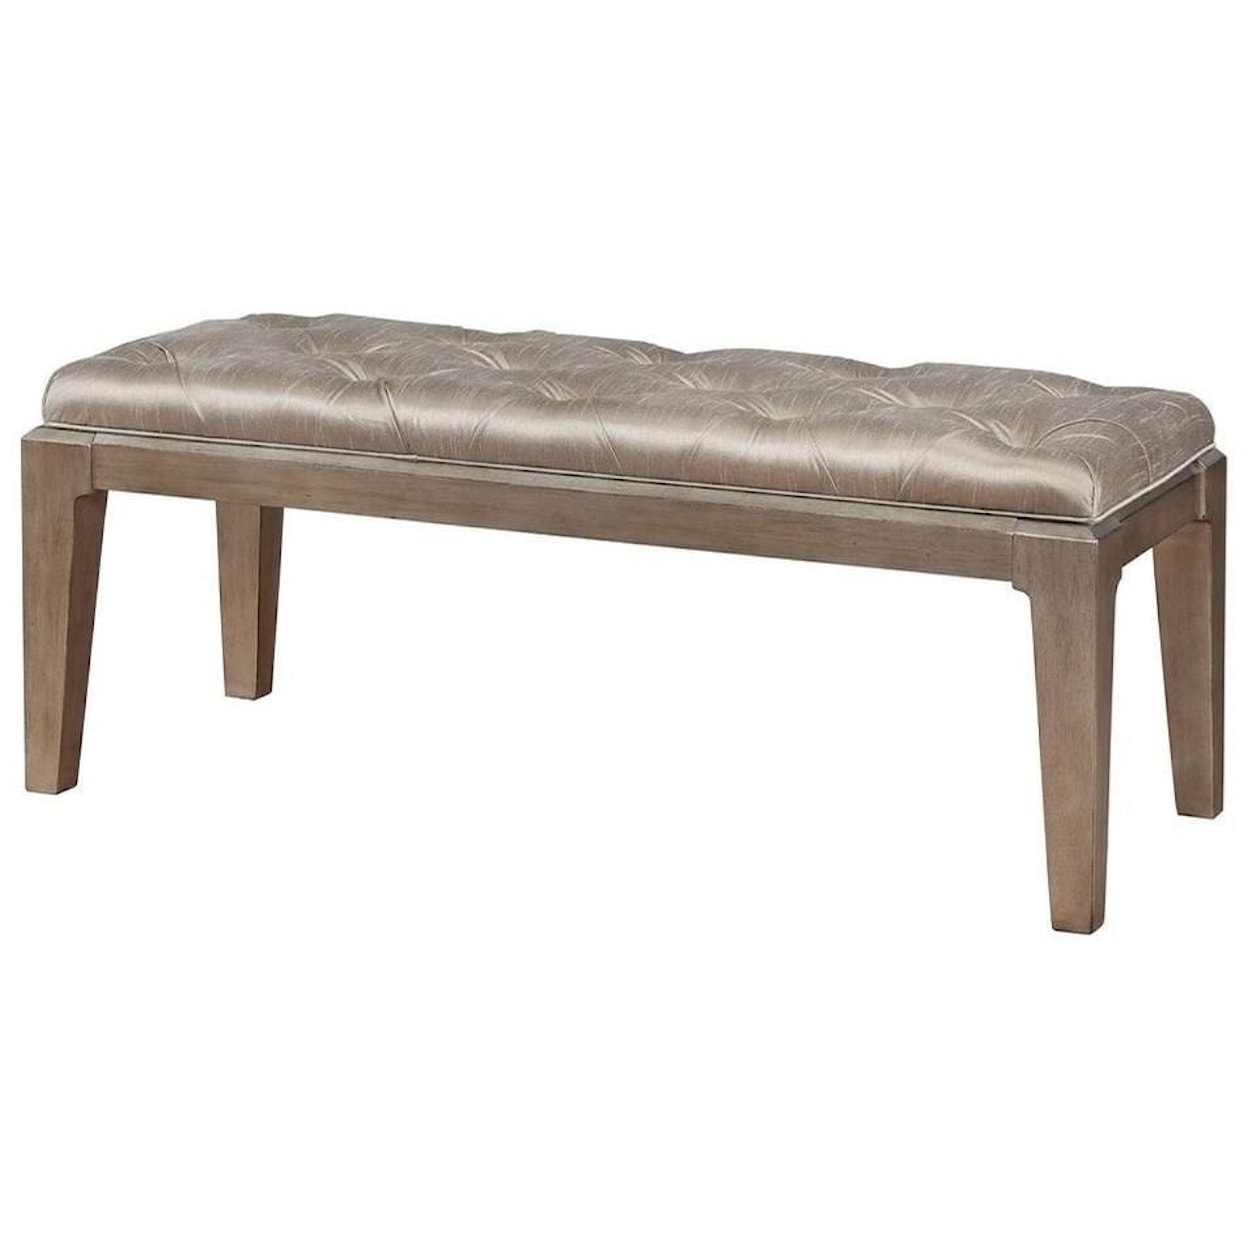 Avalon Furniture Uptown Bed Bench